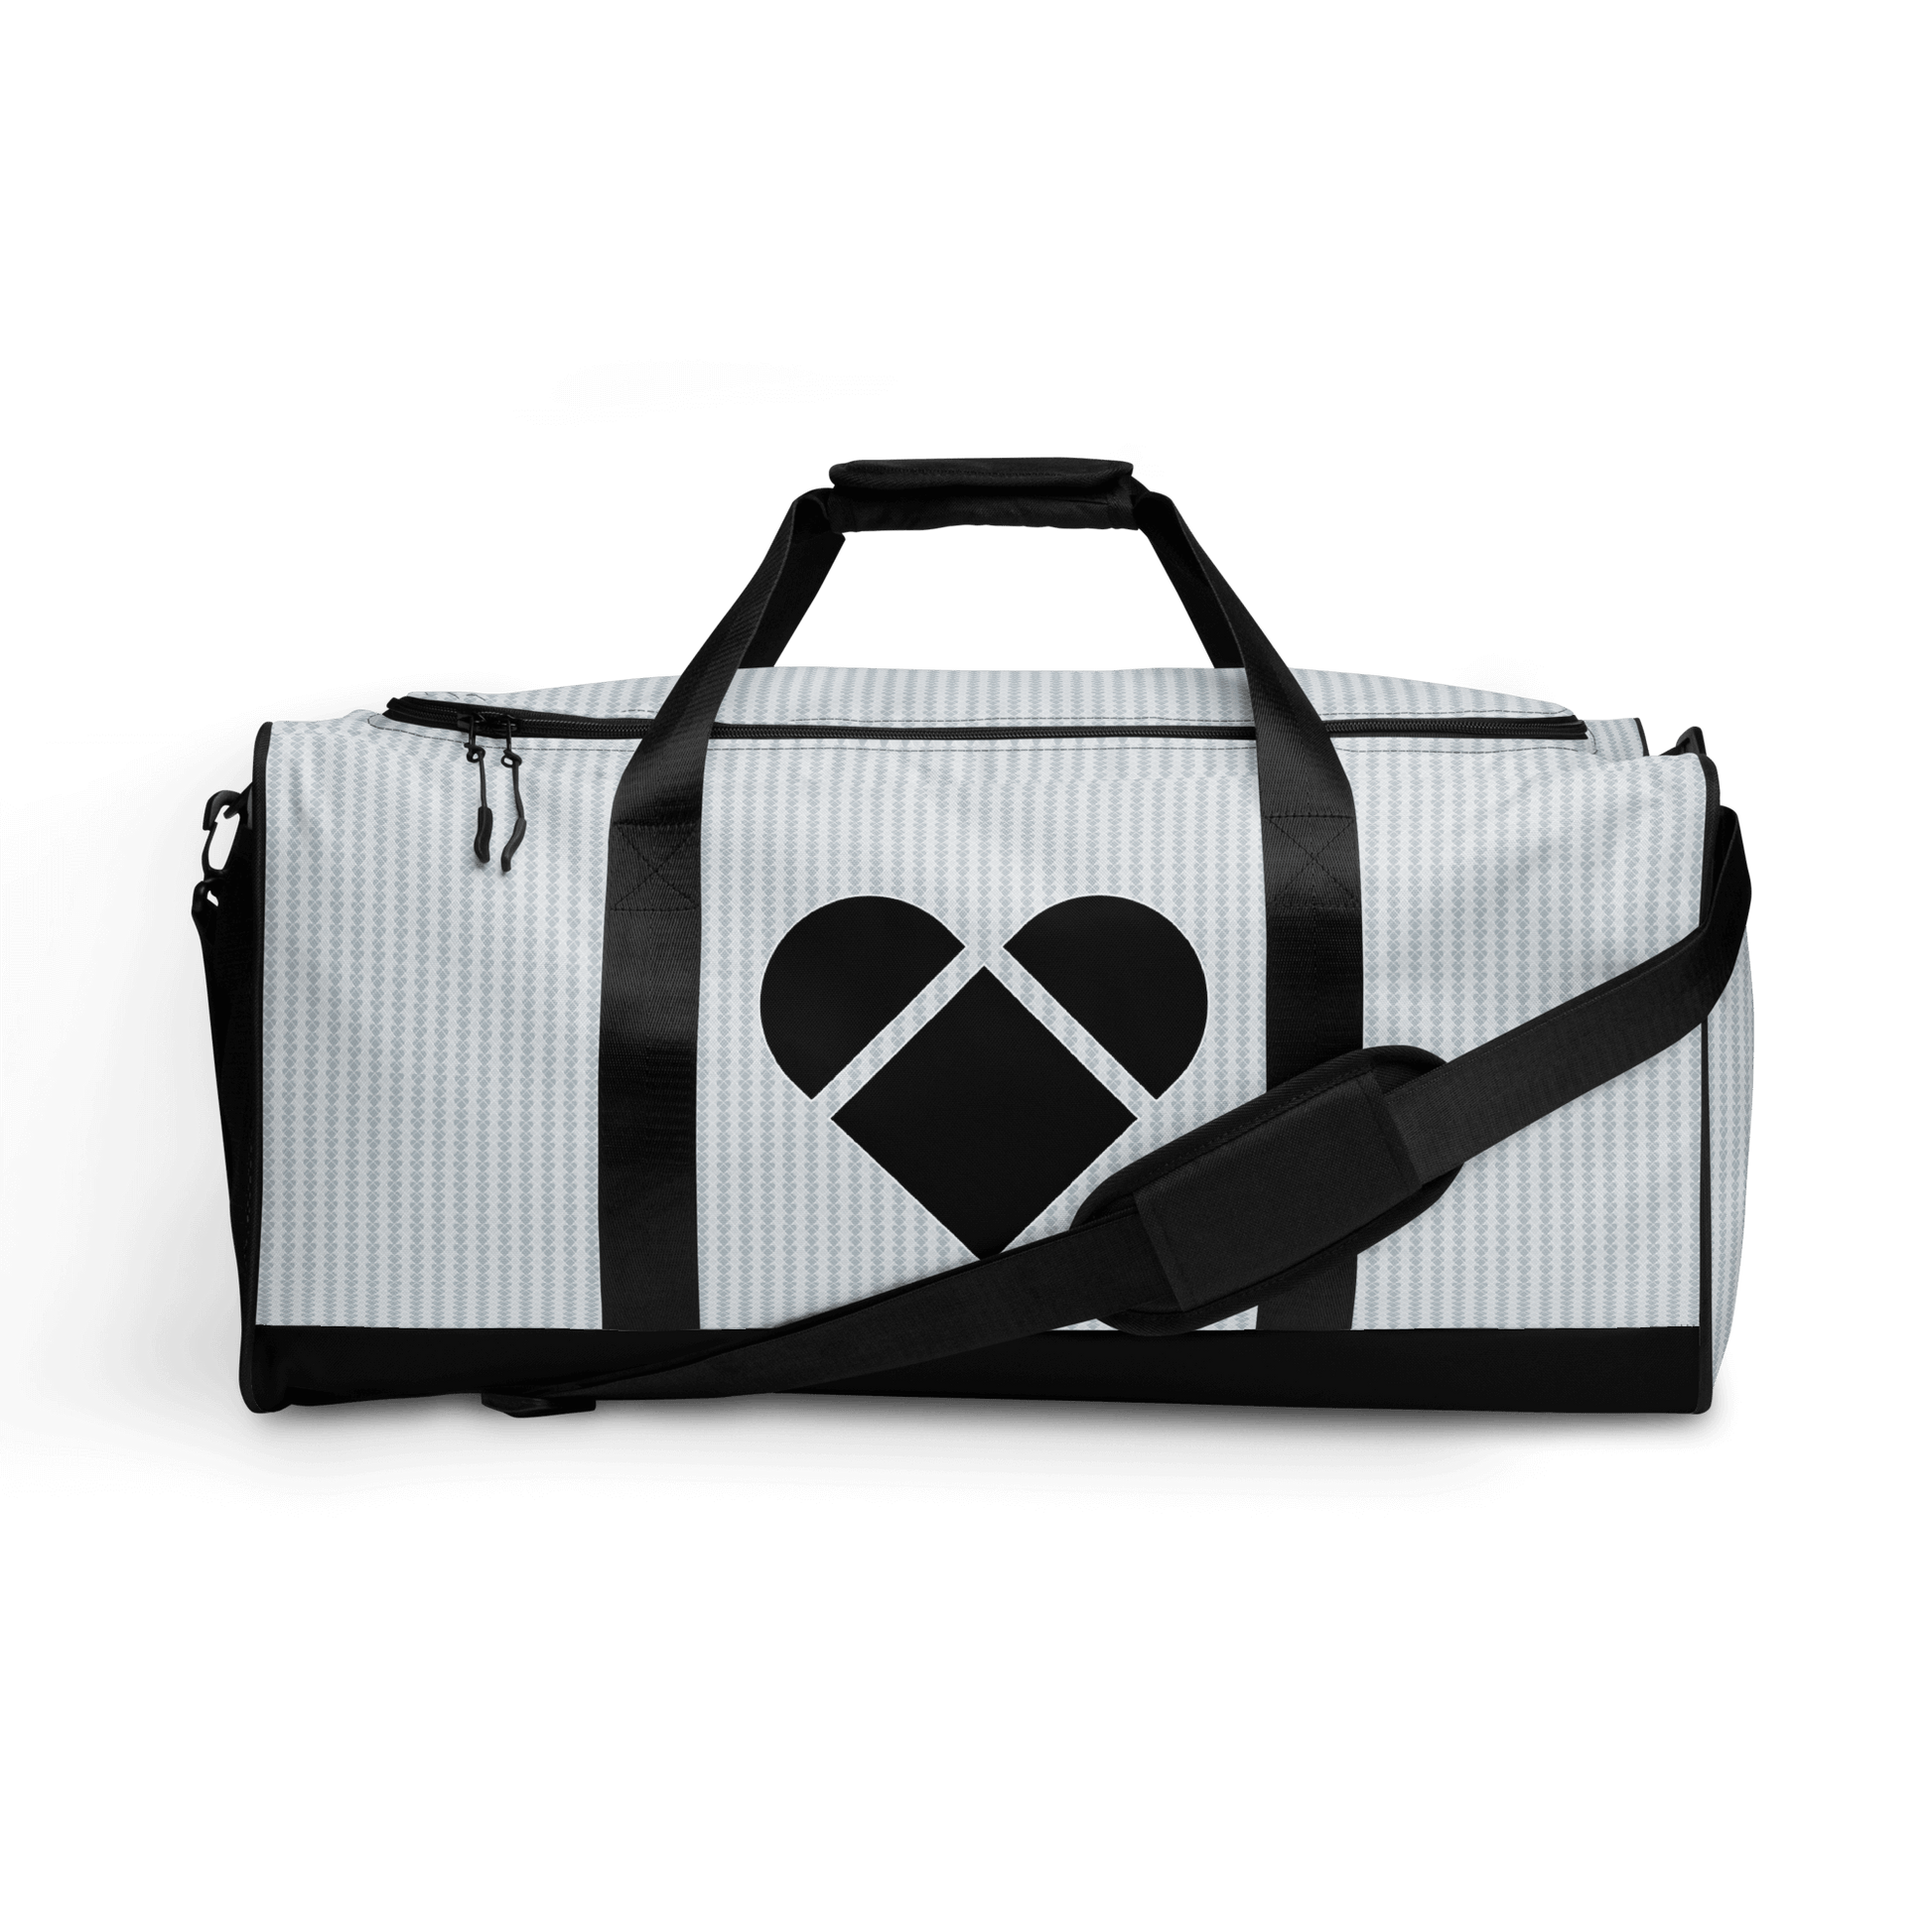 Lovogram duffle bag in light gray | Amor Primero Collection, front view